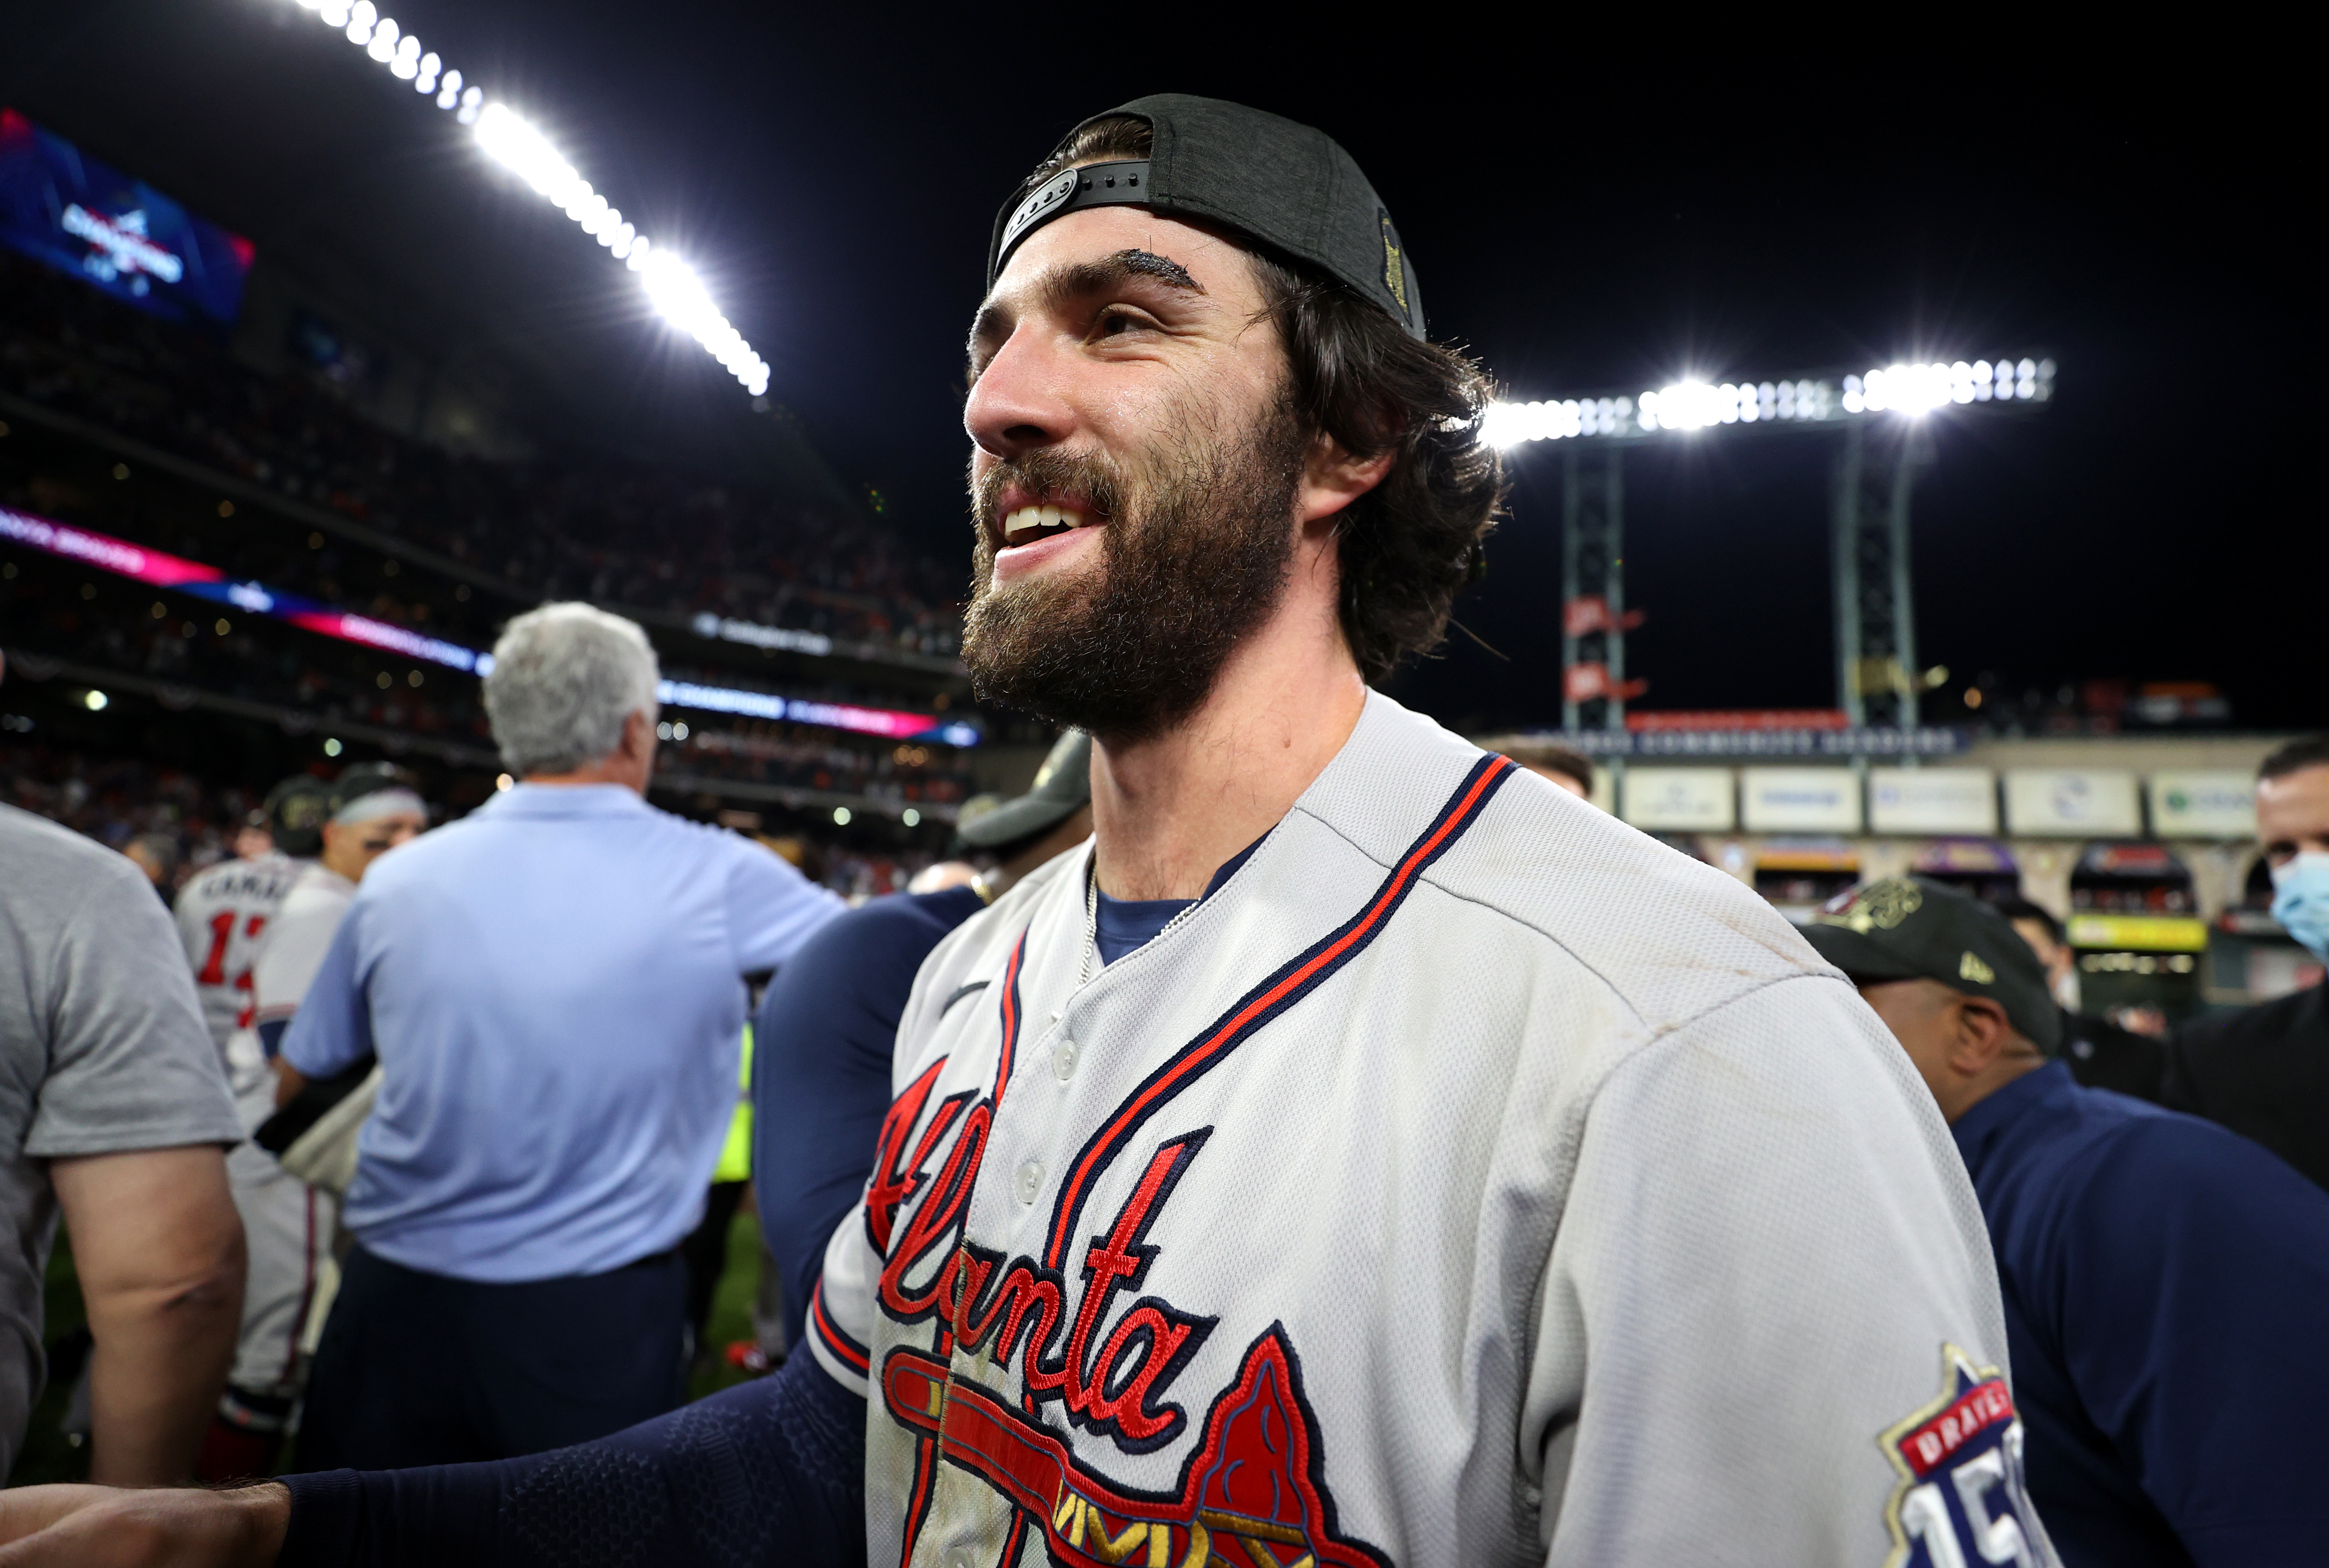 Atlanta Braves: Dansby Swanson's World Series instincts rooted at